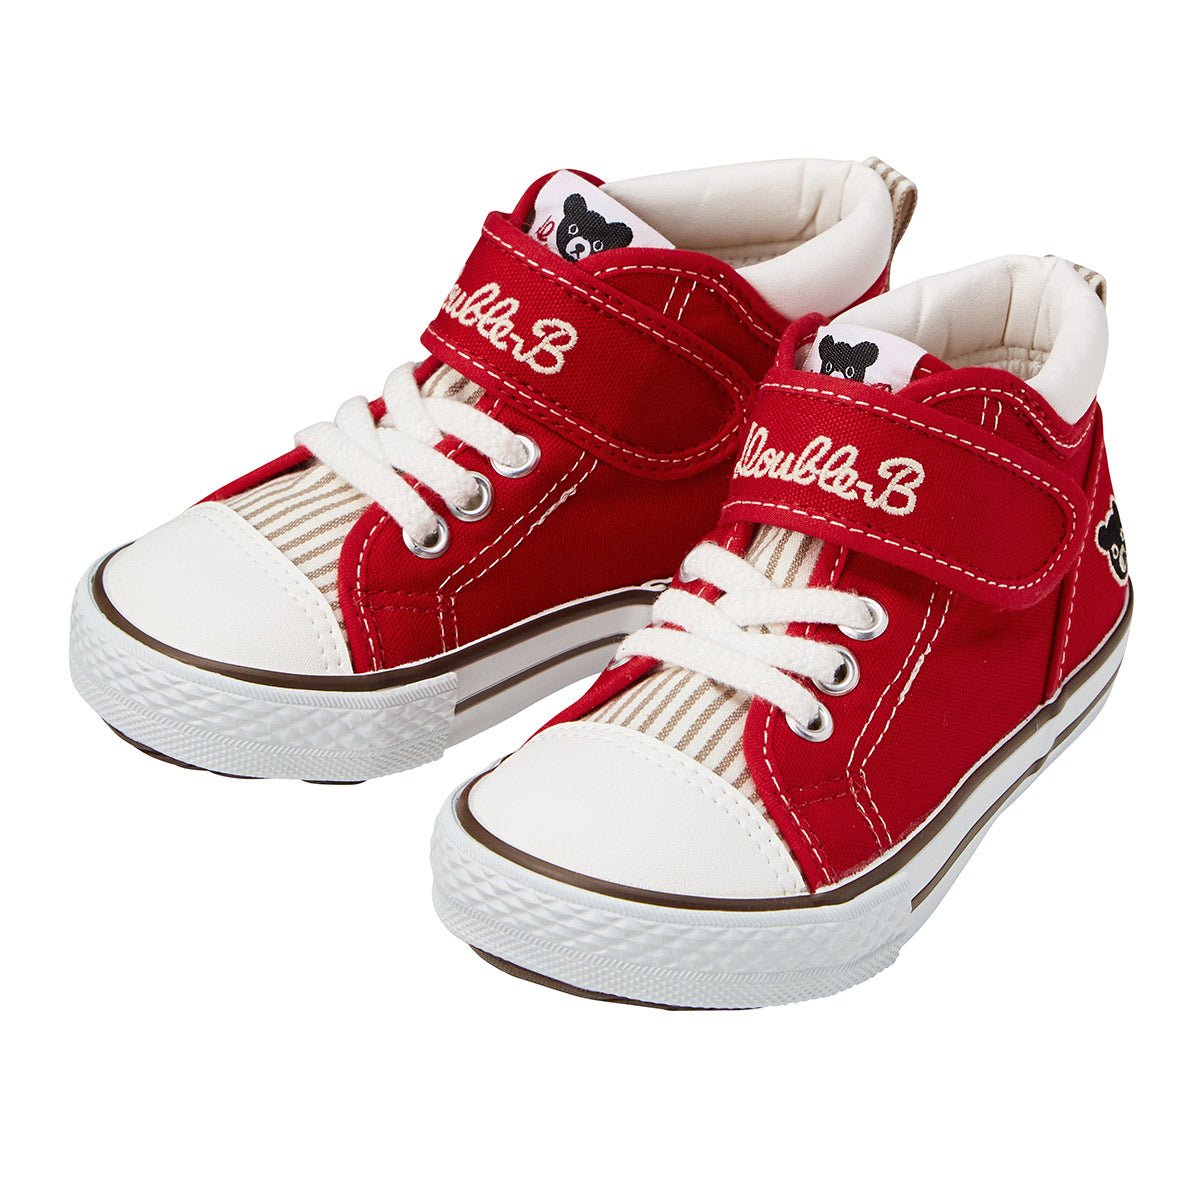 DOUBLE_B High Top Shoes for Kids - Street Style - 63-9401-261-02-16